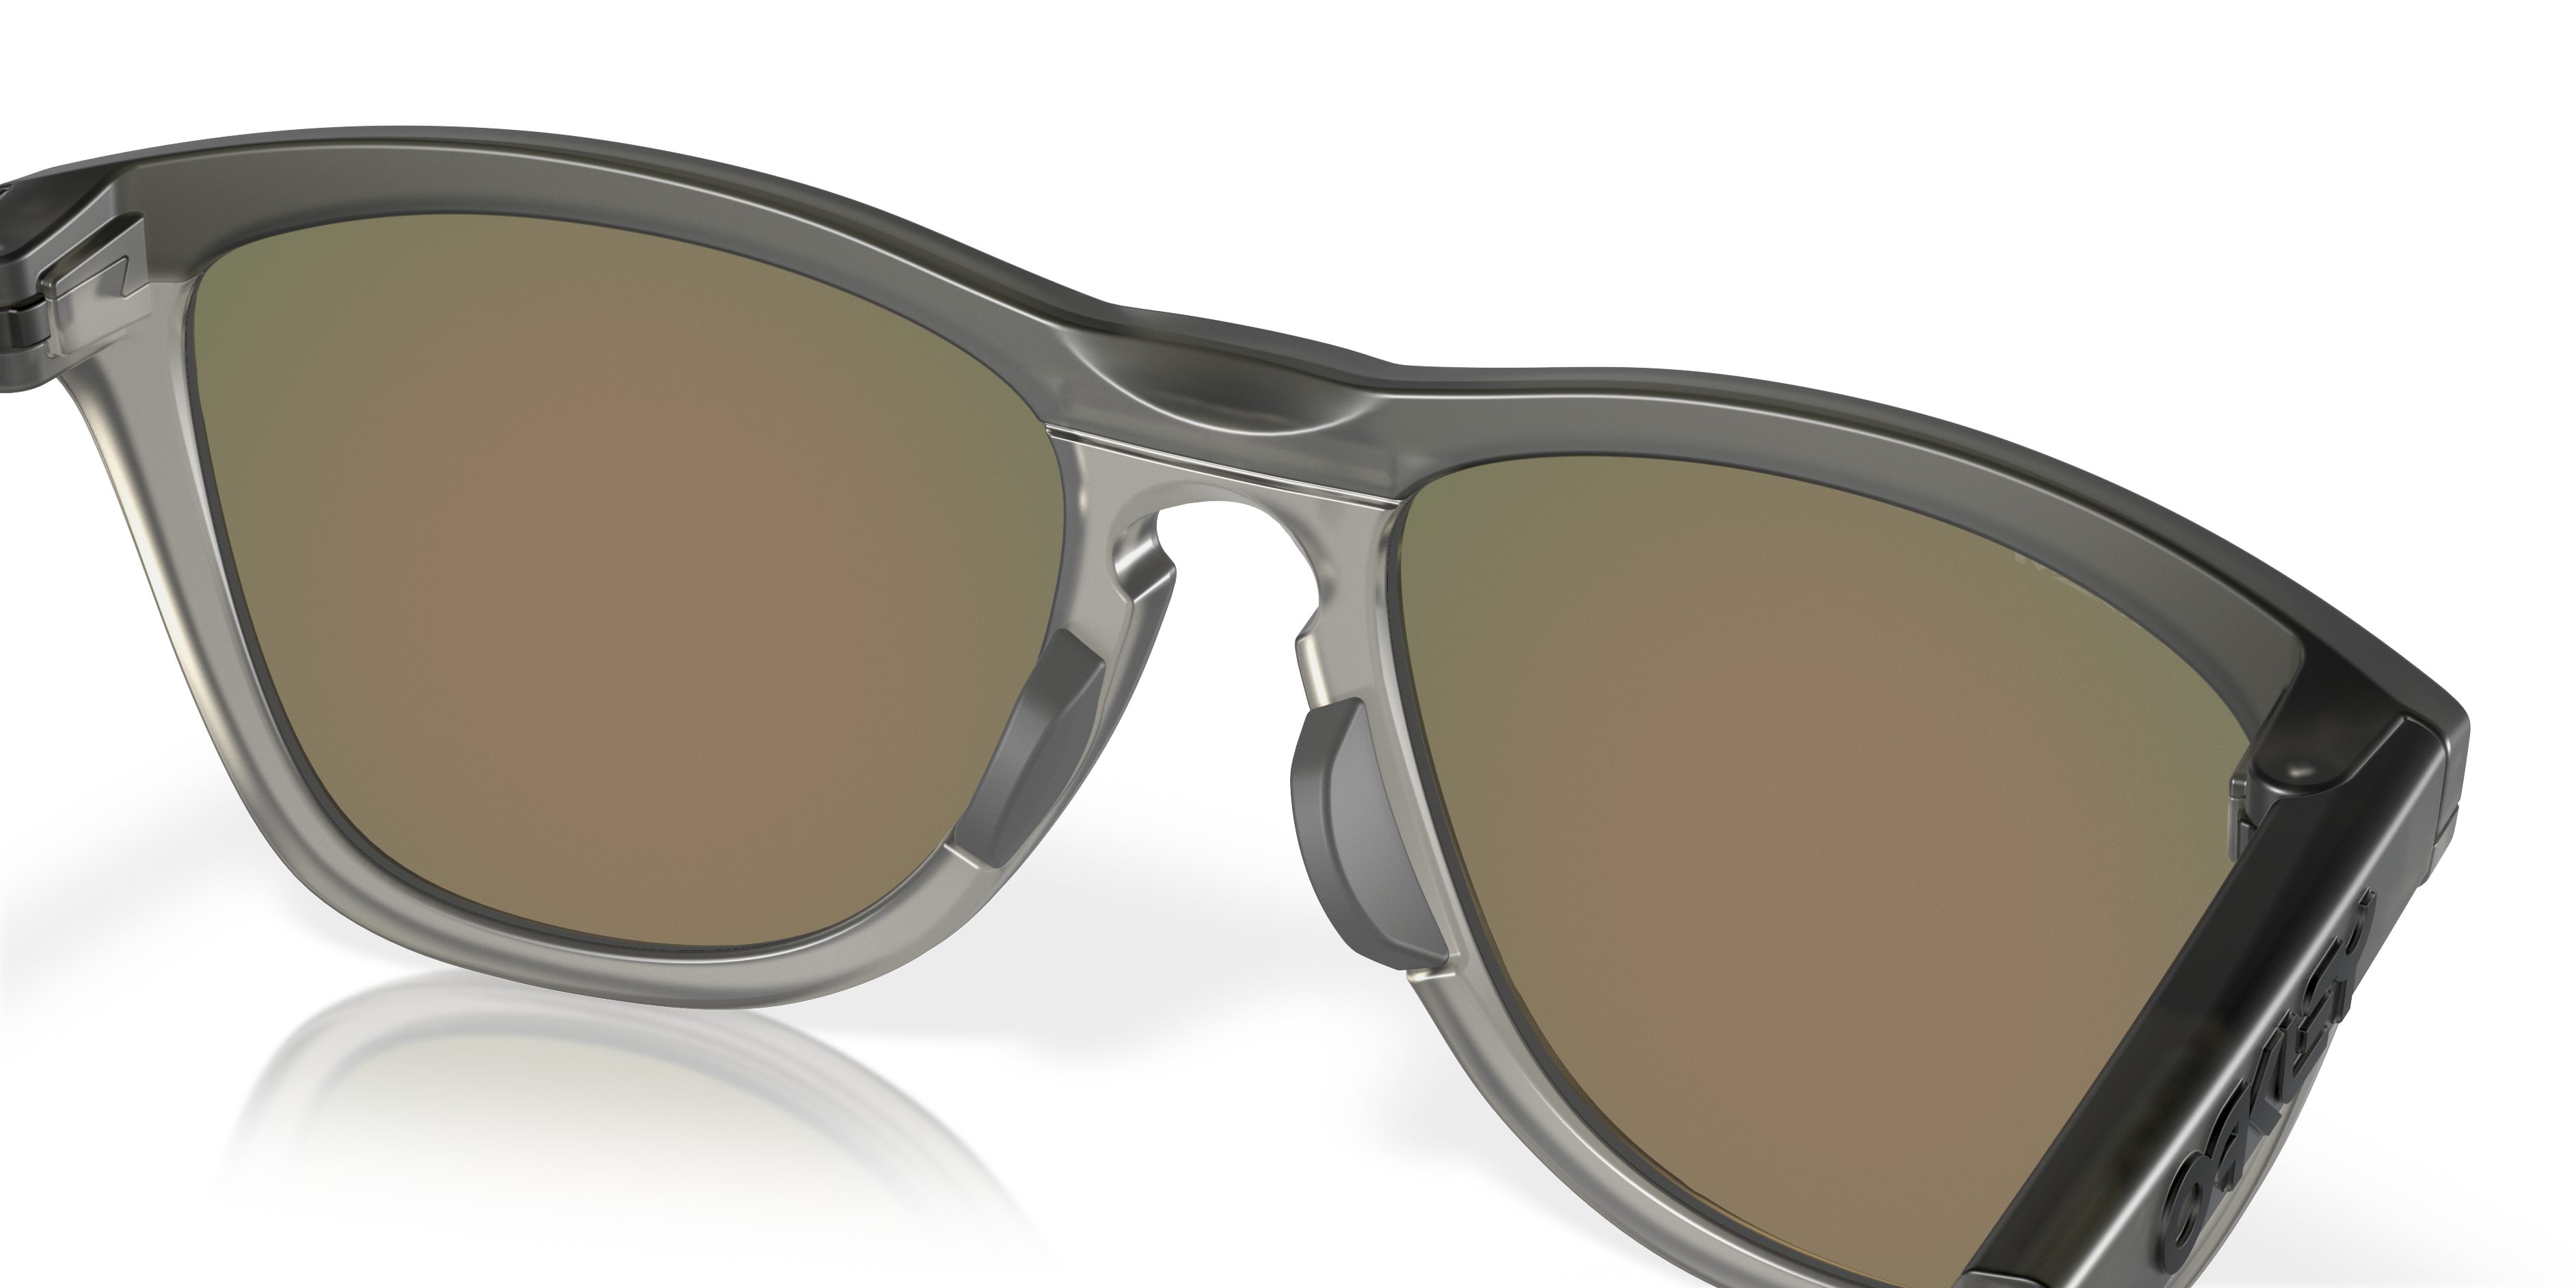 [products.image.detail03] Oakley Frogskins Range 0OO9284 928401